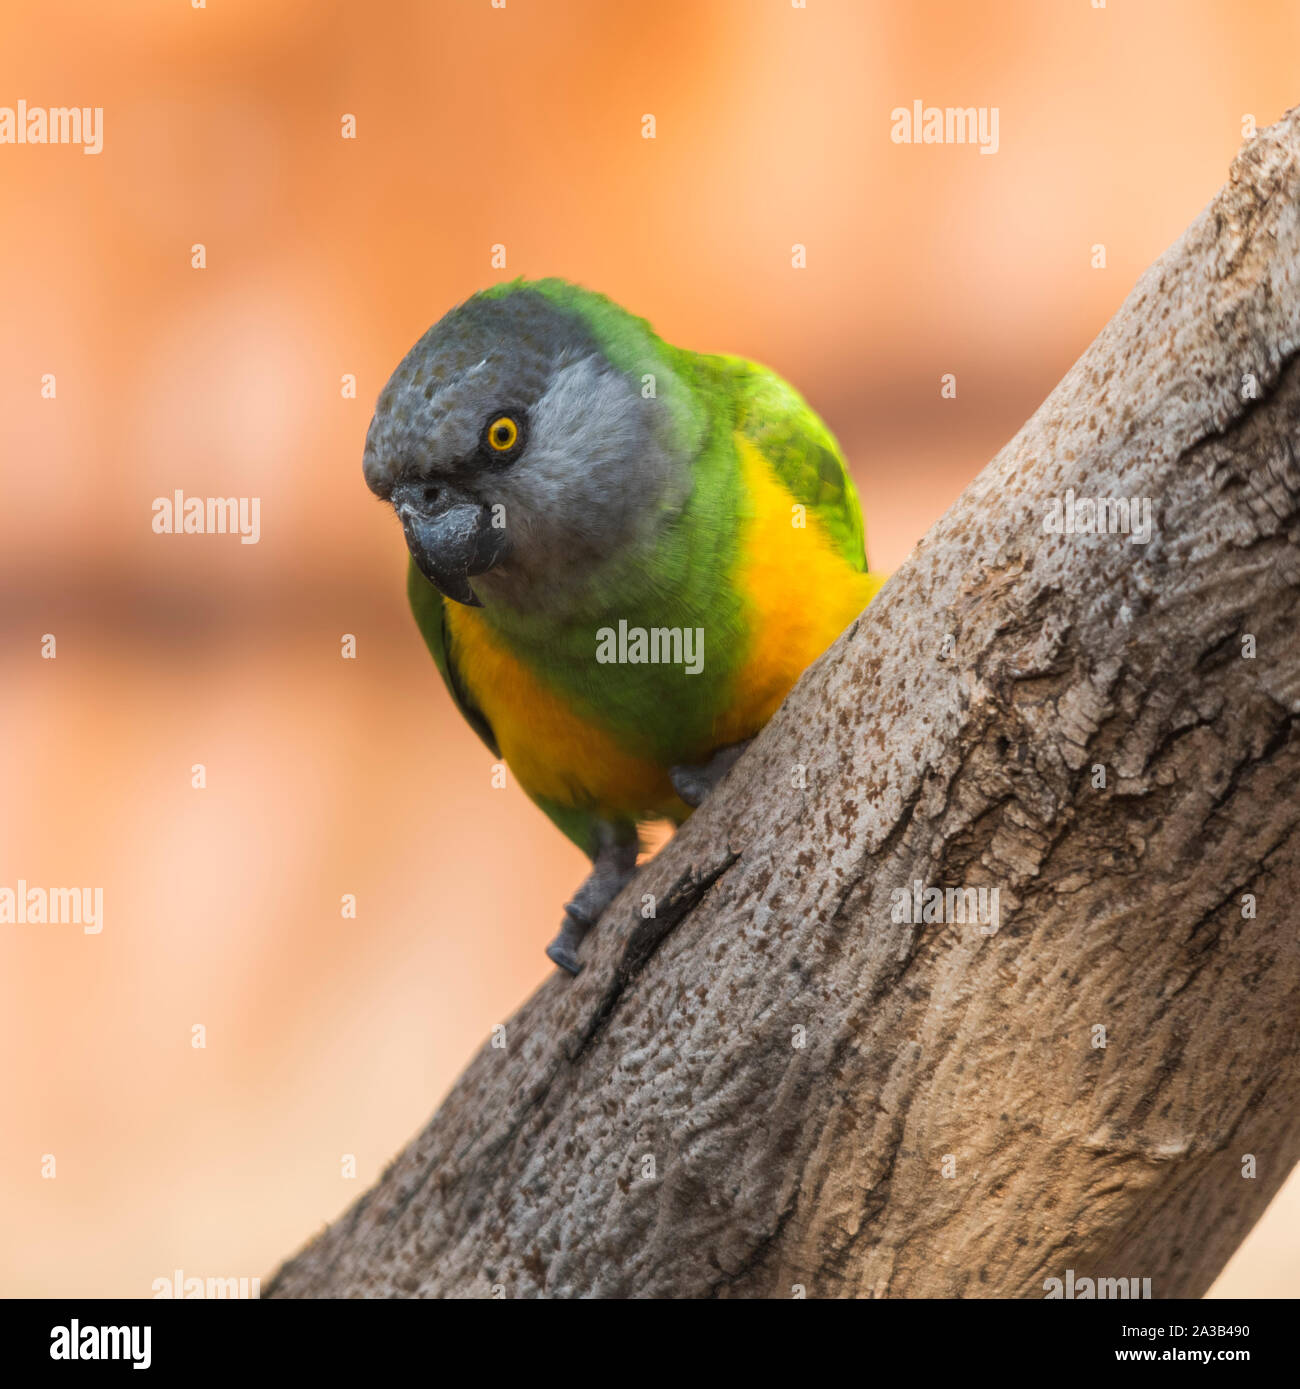 Senegal parrot on a branch Stock Photo